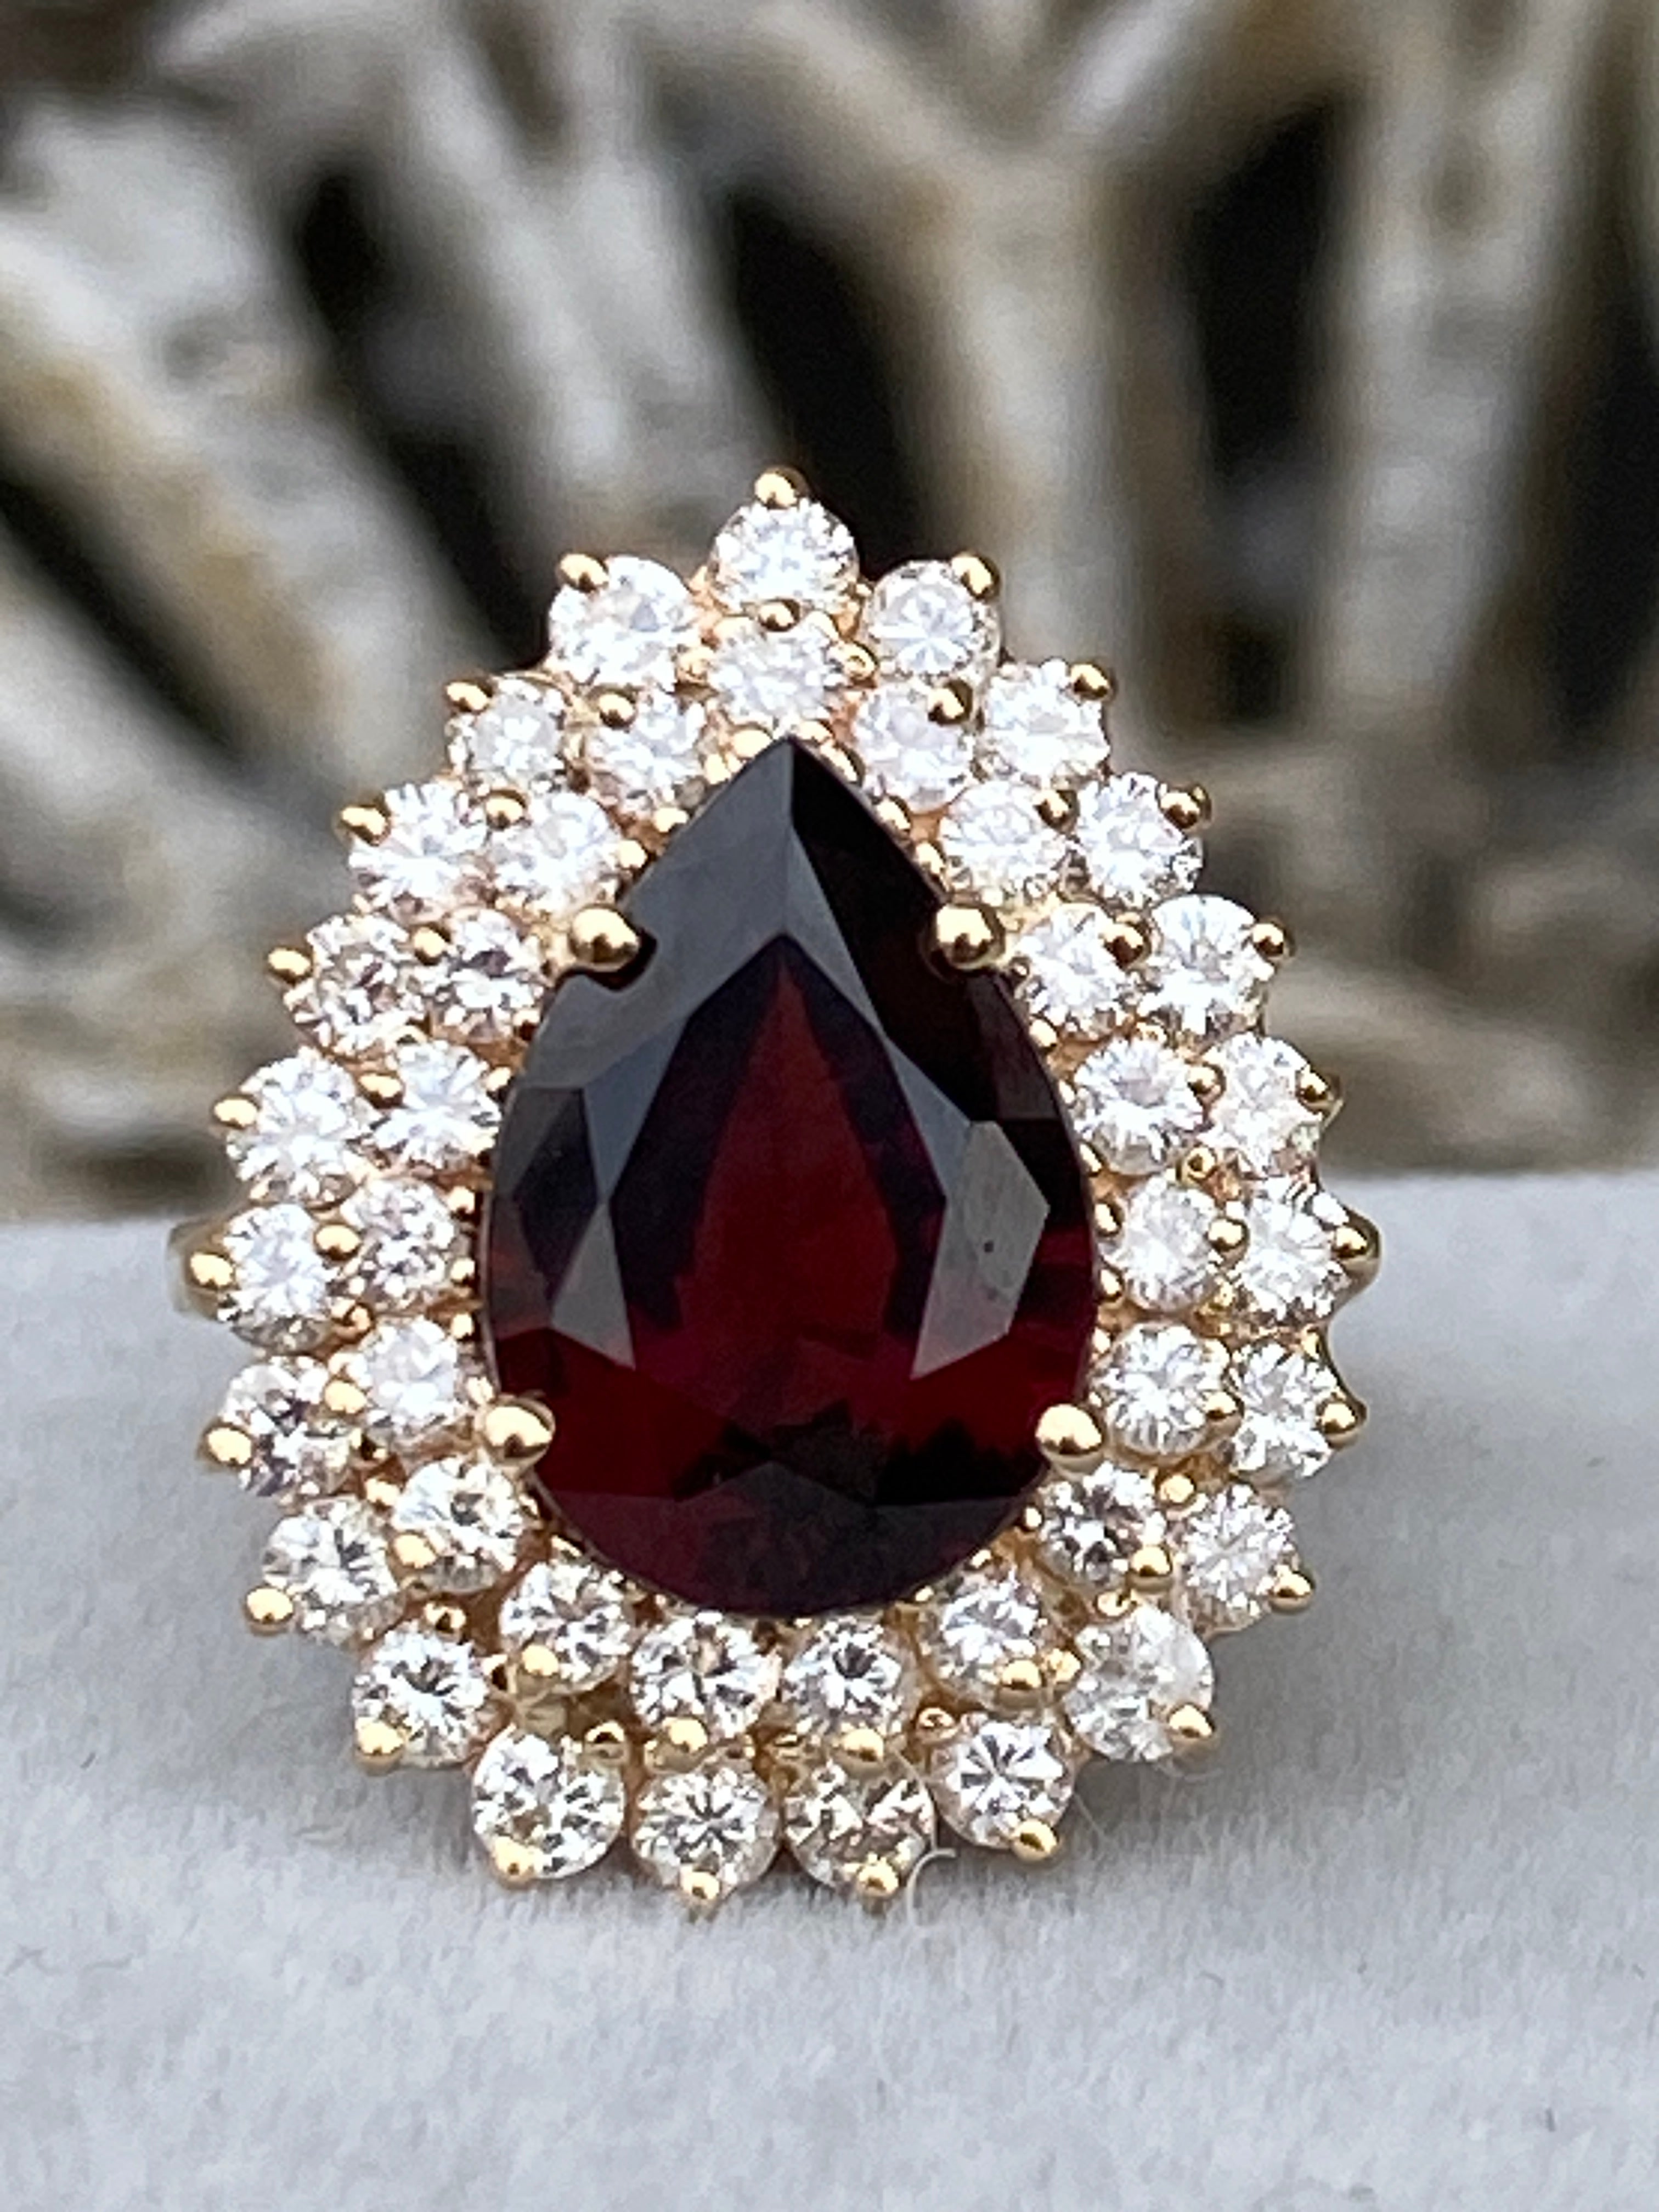 We instantly fell in love with showstopper of a ring as soon as we saw it.  It features a beautiful natural pear shaped faceted red garnet at the center surrounded by a double halo of sparking natural near colorless diamonds. Crafted in 14 karat